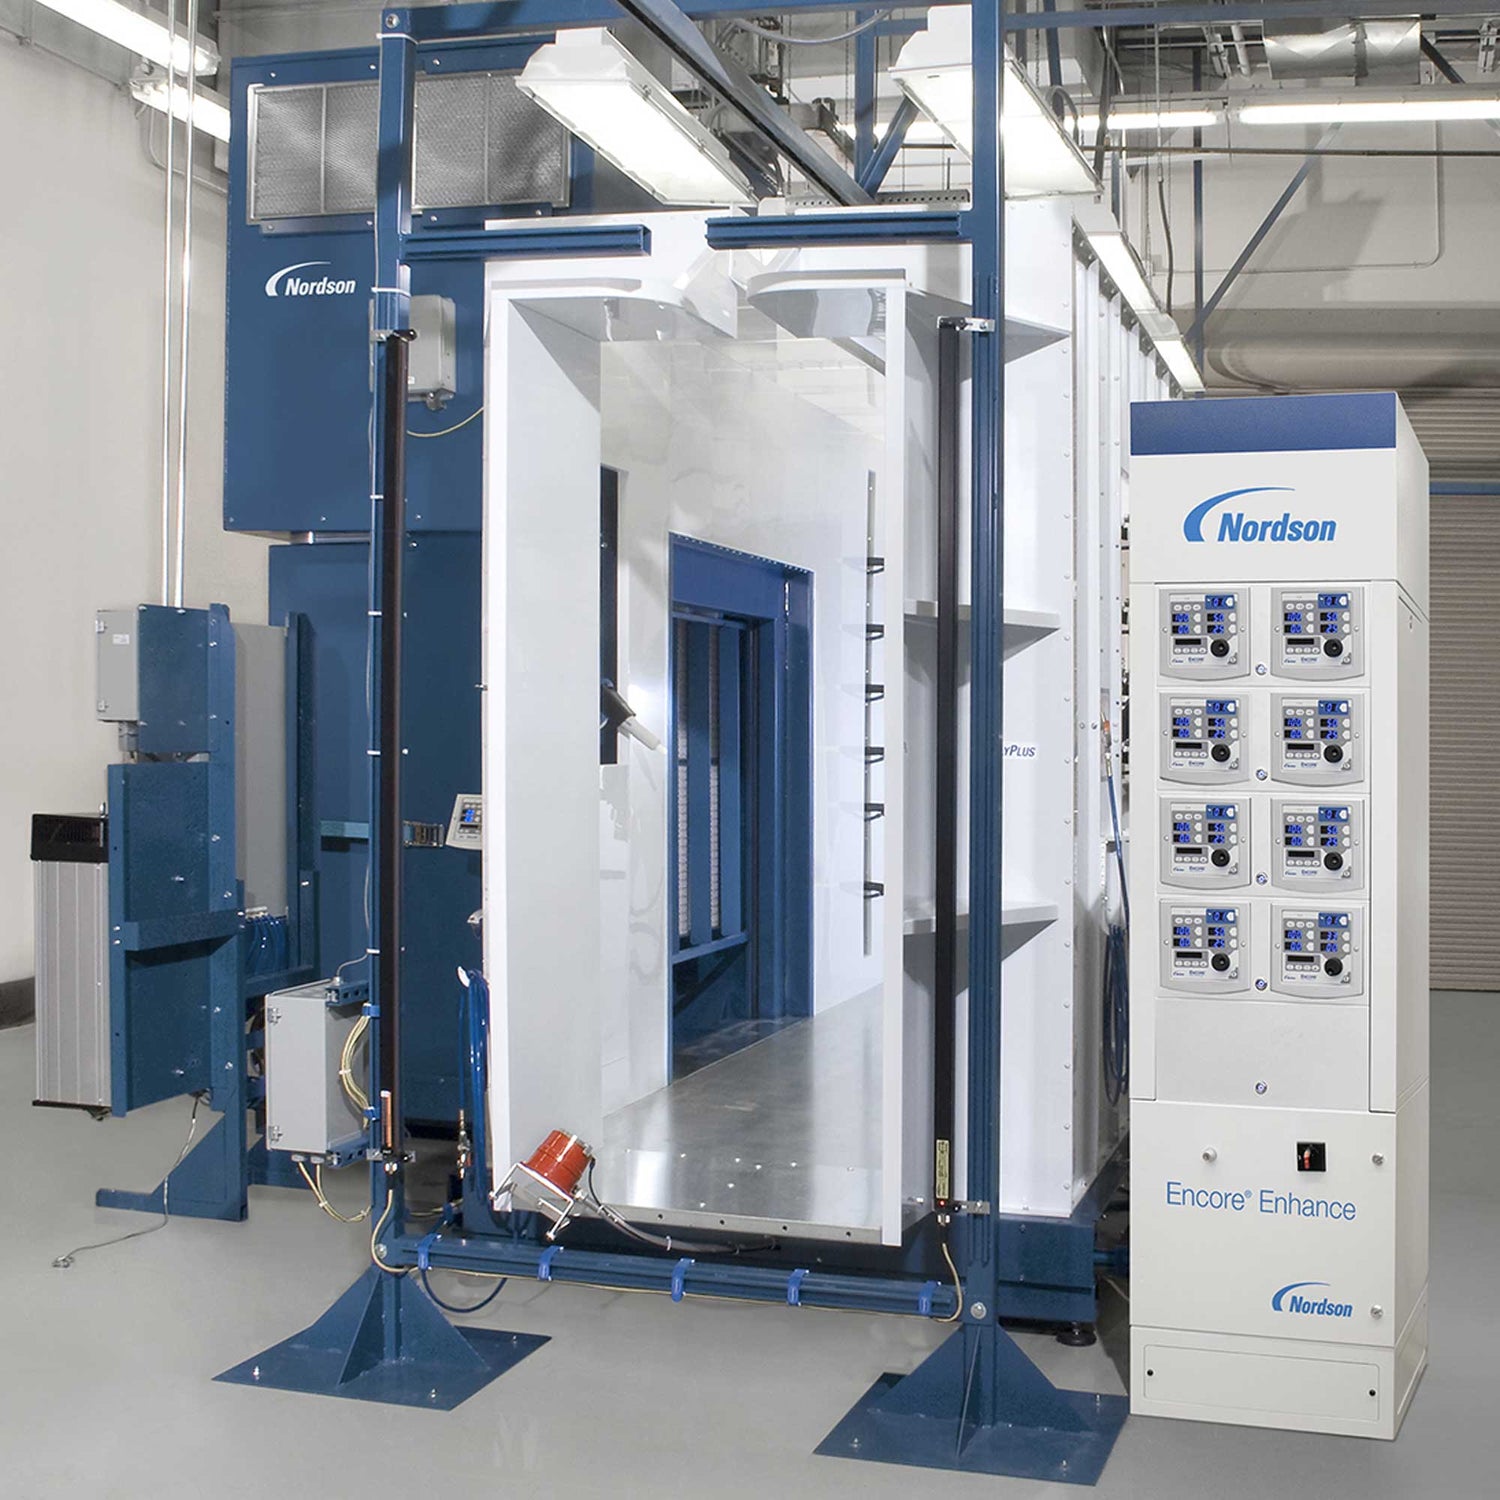 Transform Your Coating Process with the Nordson Excel 3000 Powder Coating Booth